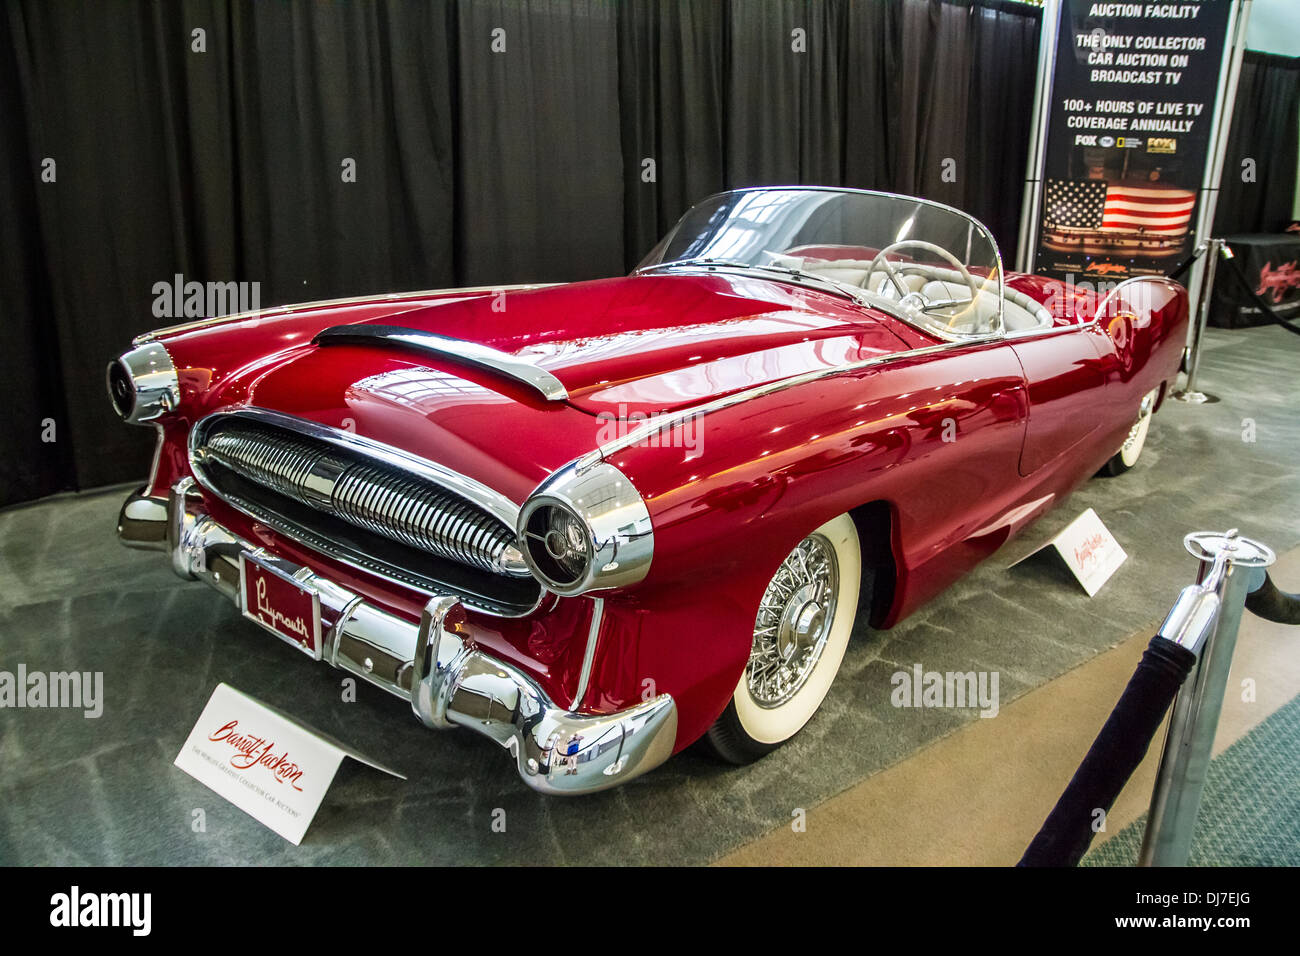 The 1954 Plymouth at the 2013 Los Angeles International Auto Show Stock Photo